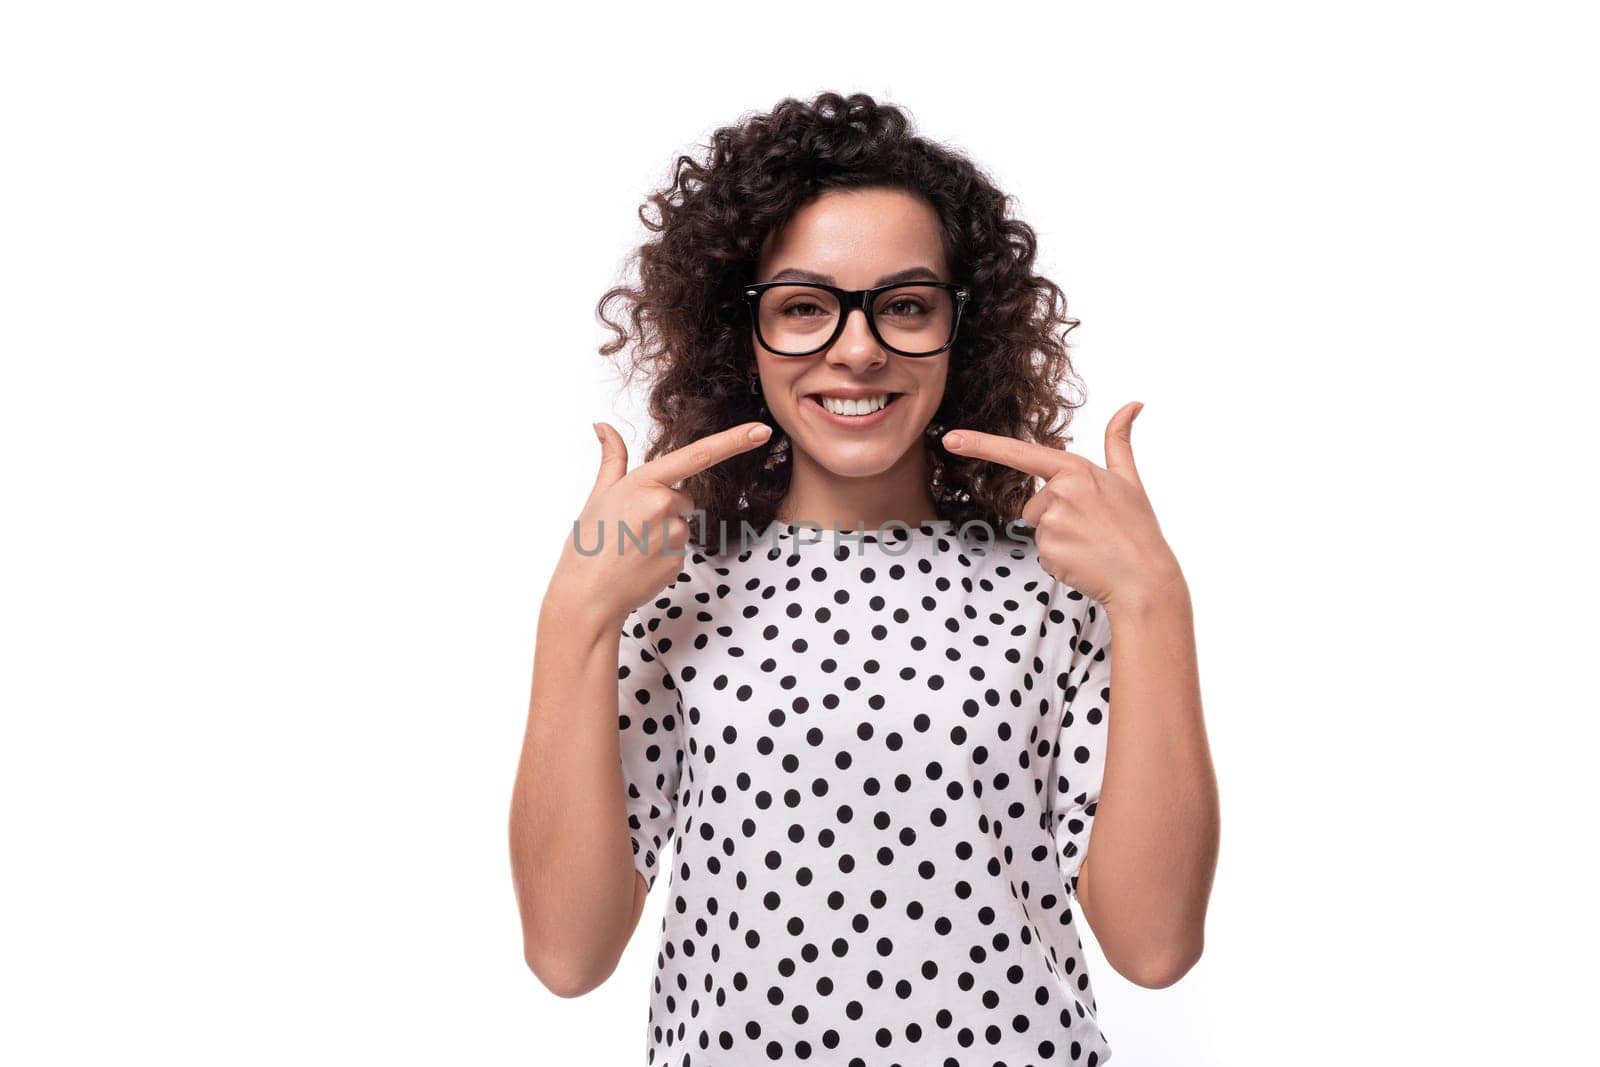 young caucasian businesswoman with curly hair dressed in a blouse with polka dots on a white background by TRMK